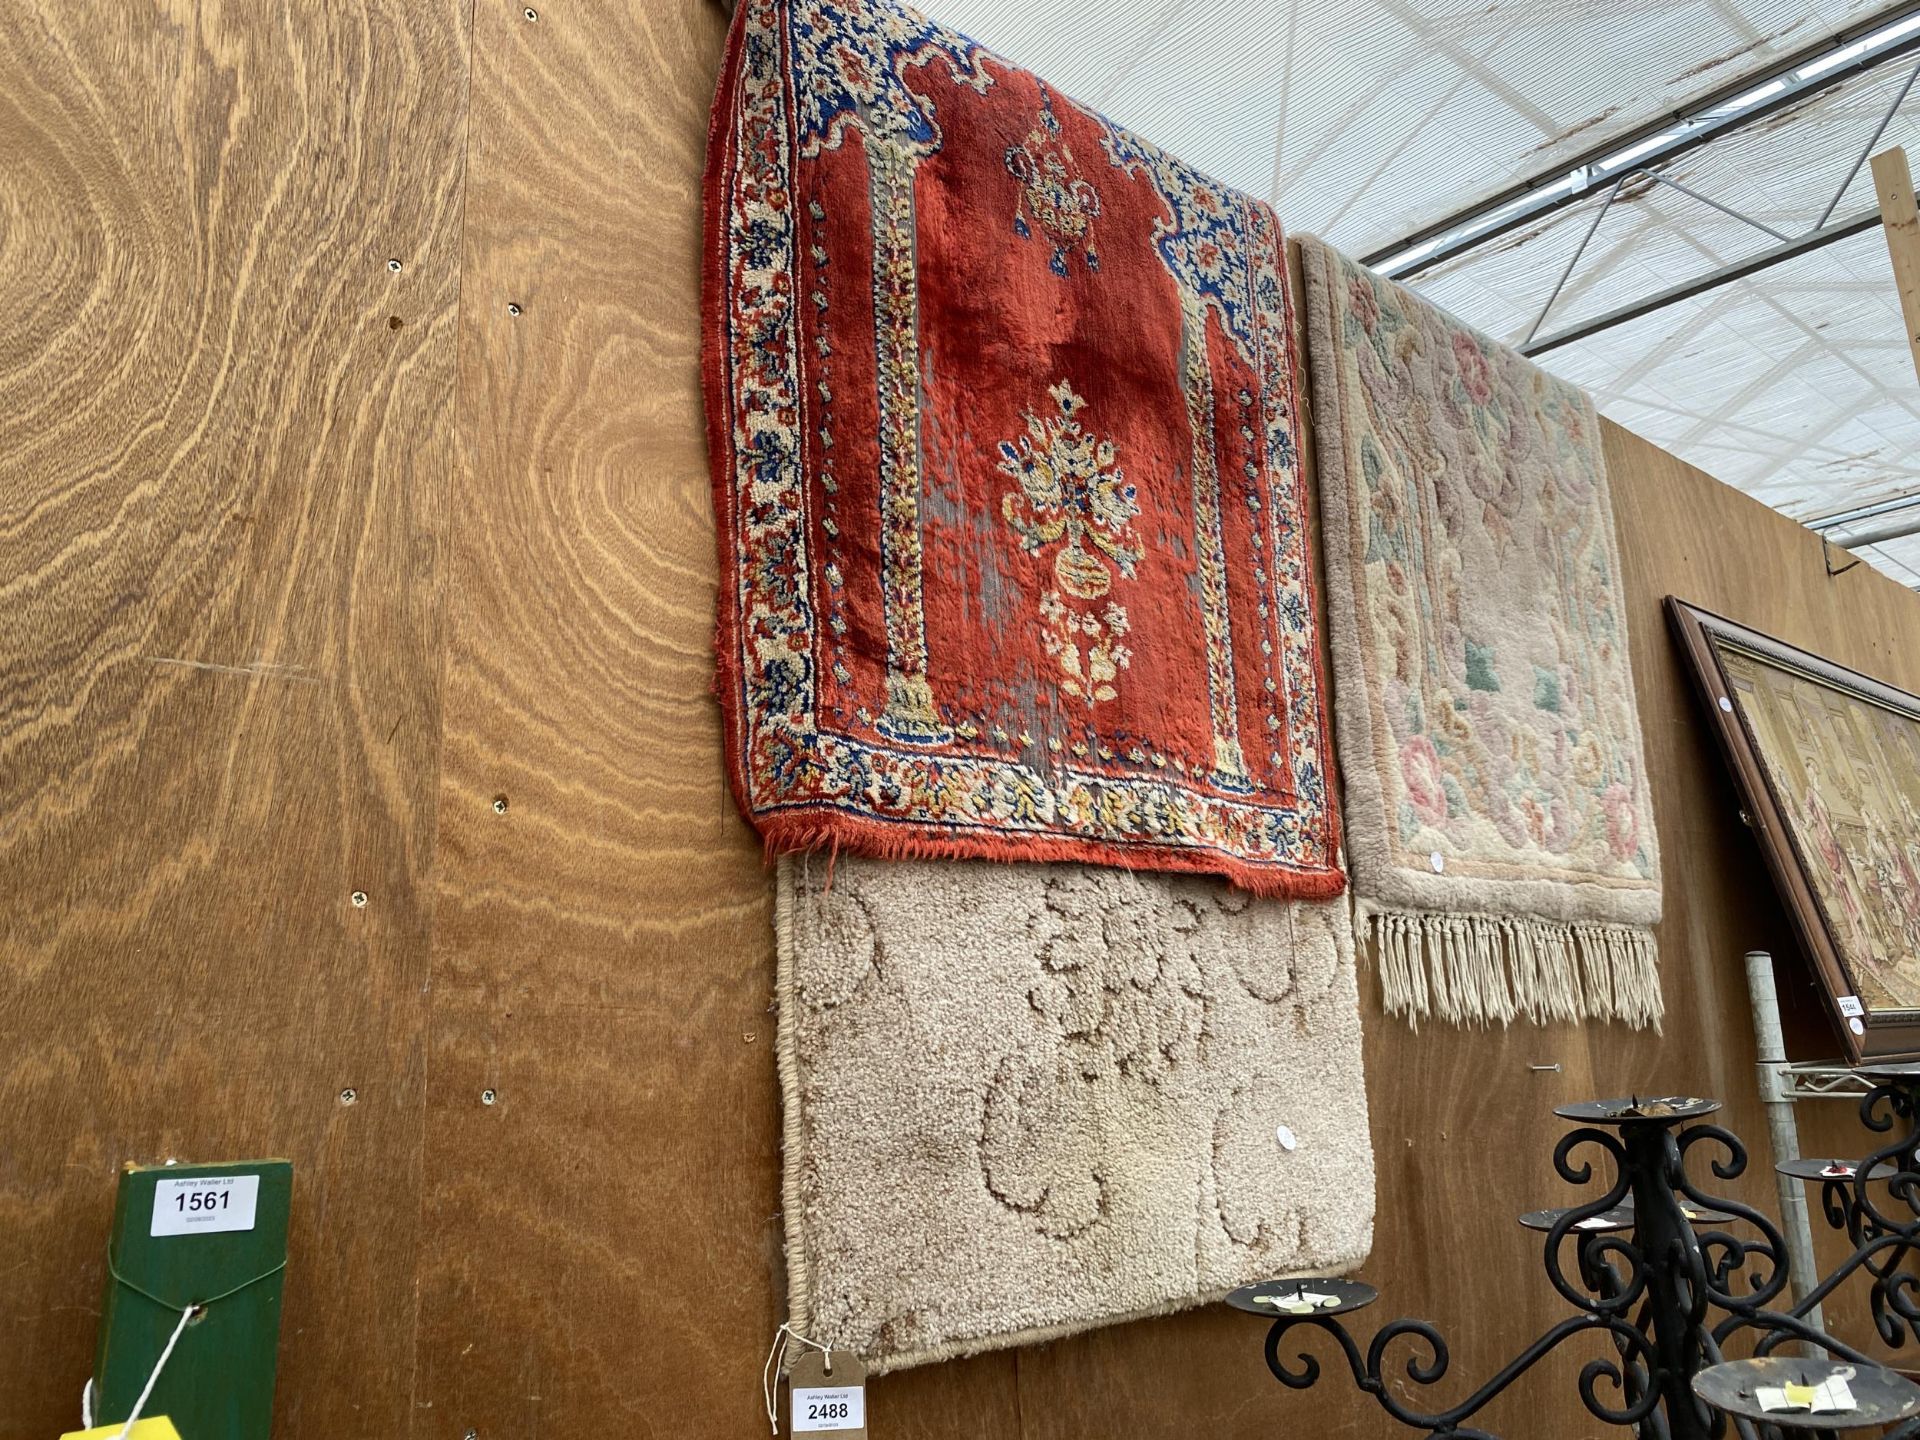 THREE SMALL PATTERNED RUGS